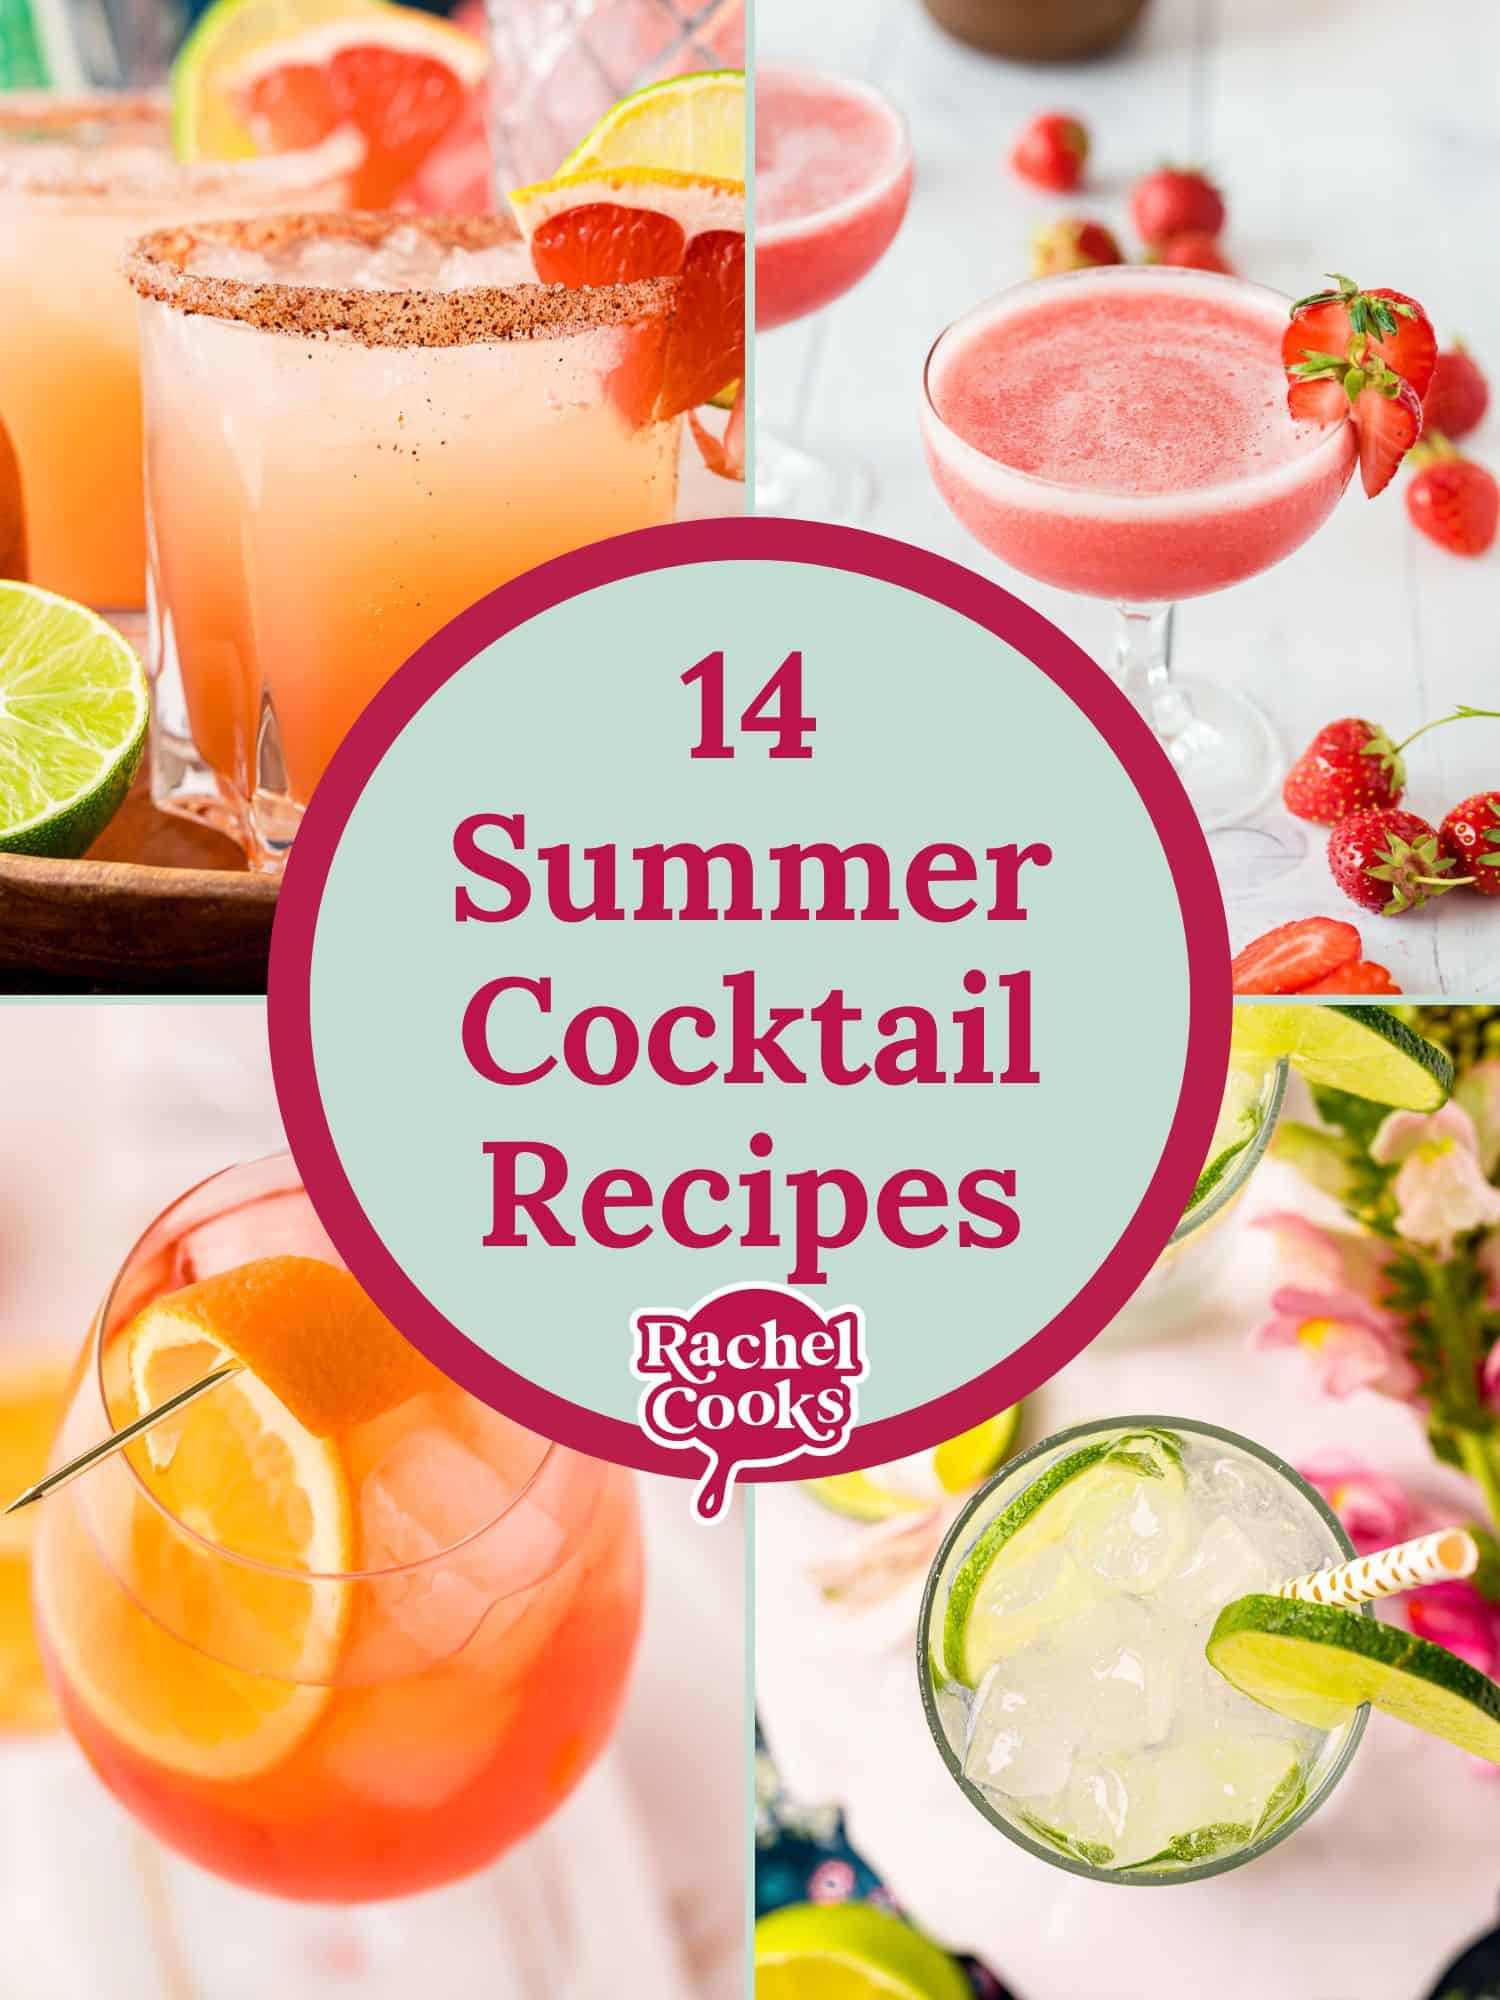 List of summer cocktail recipes, graphic with text and photos.